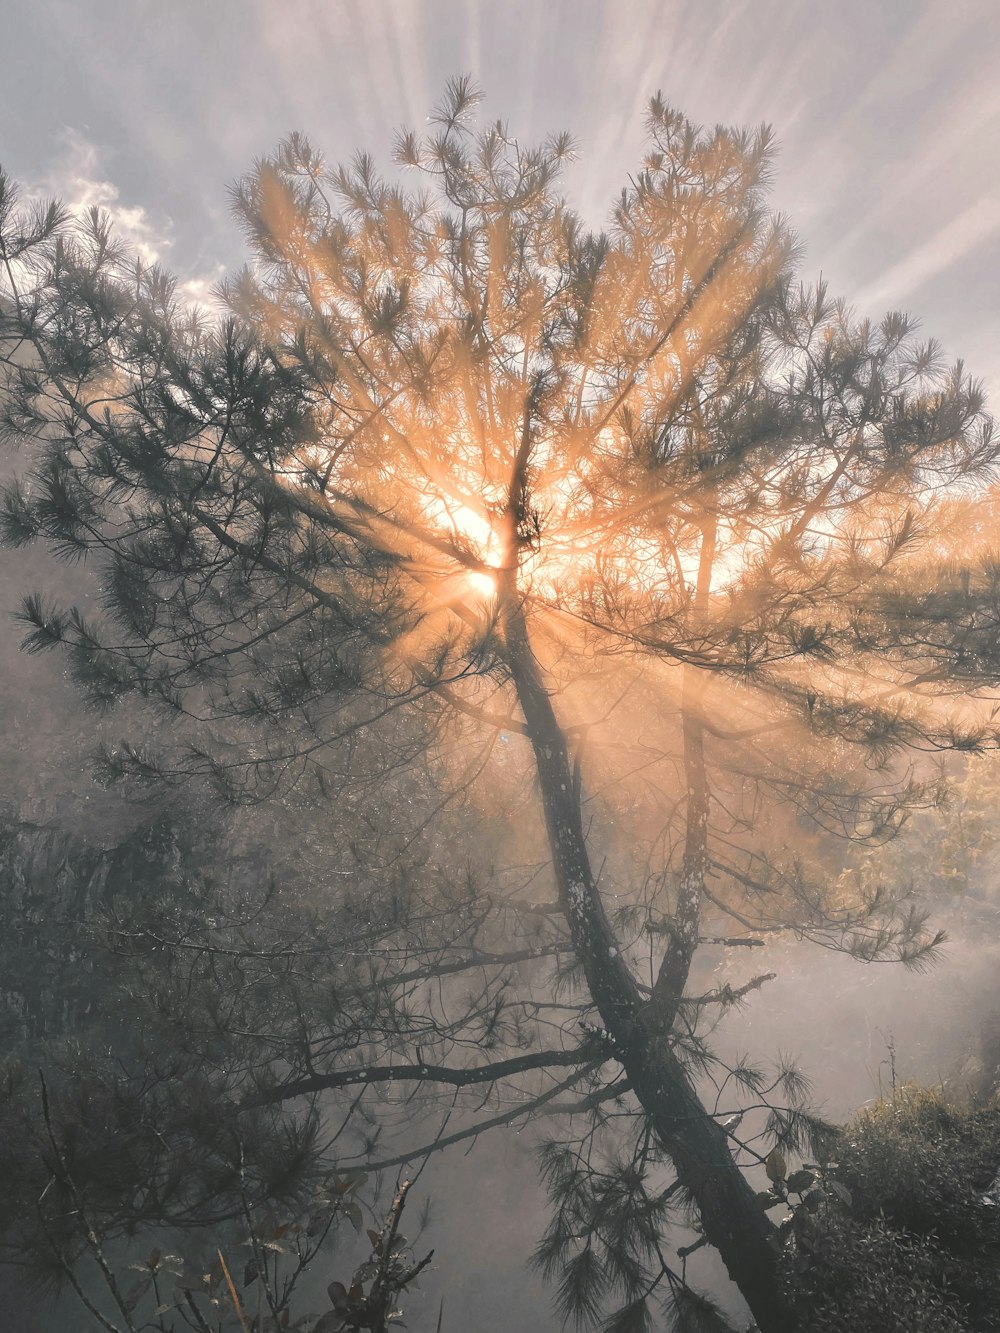 the sun shines through the clouds behind a tree